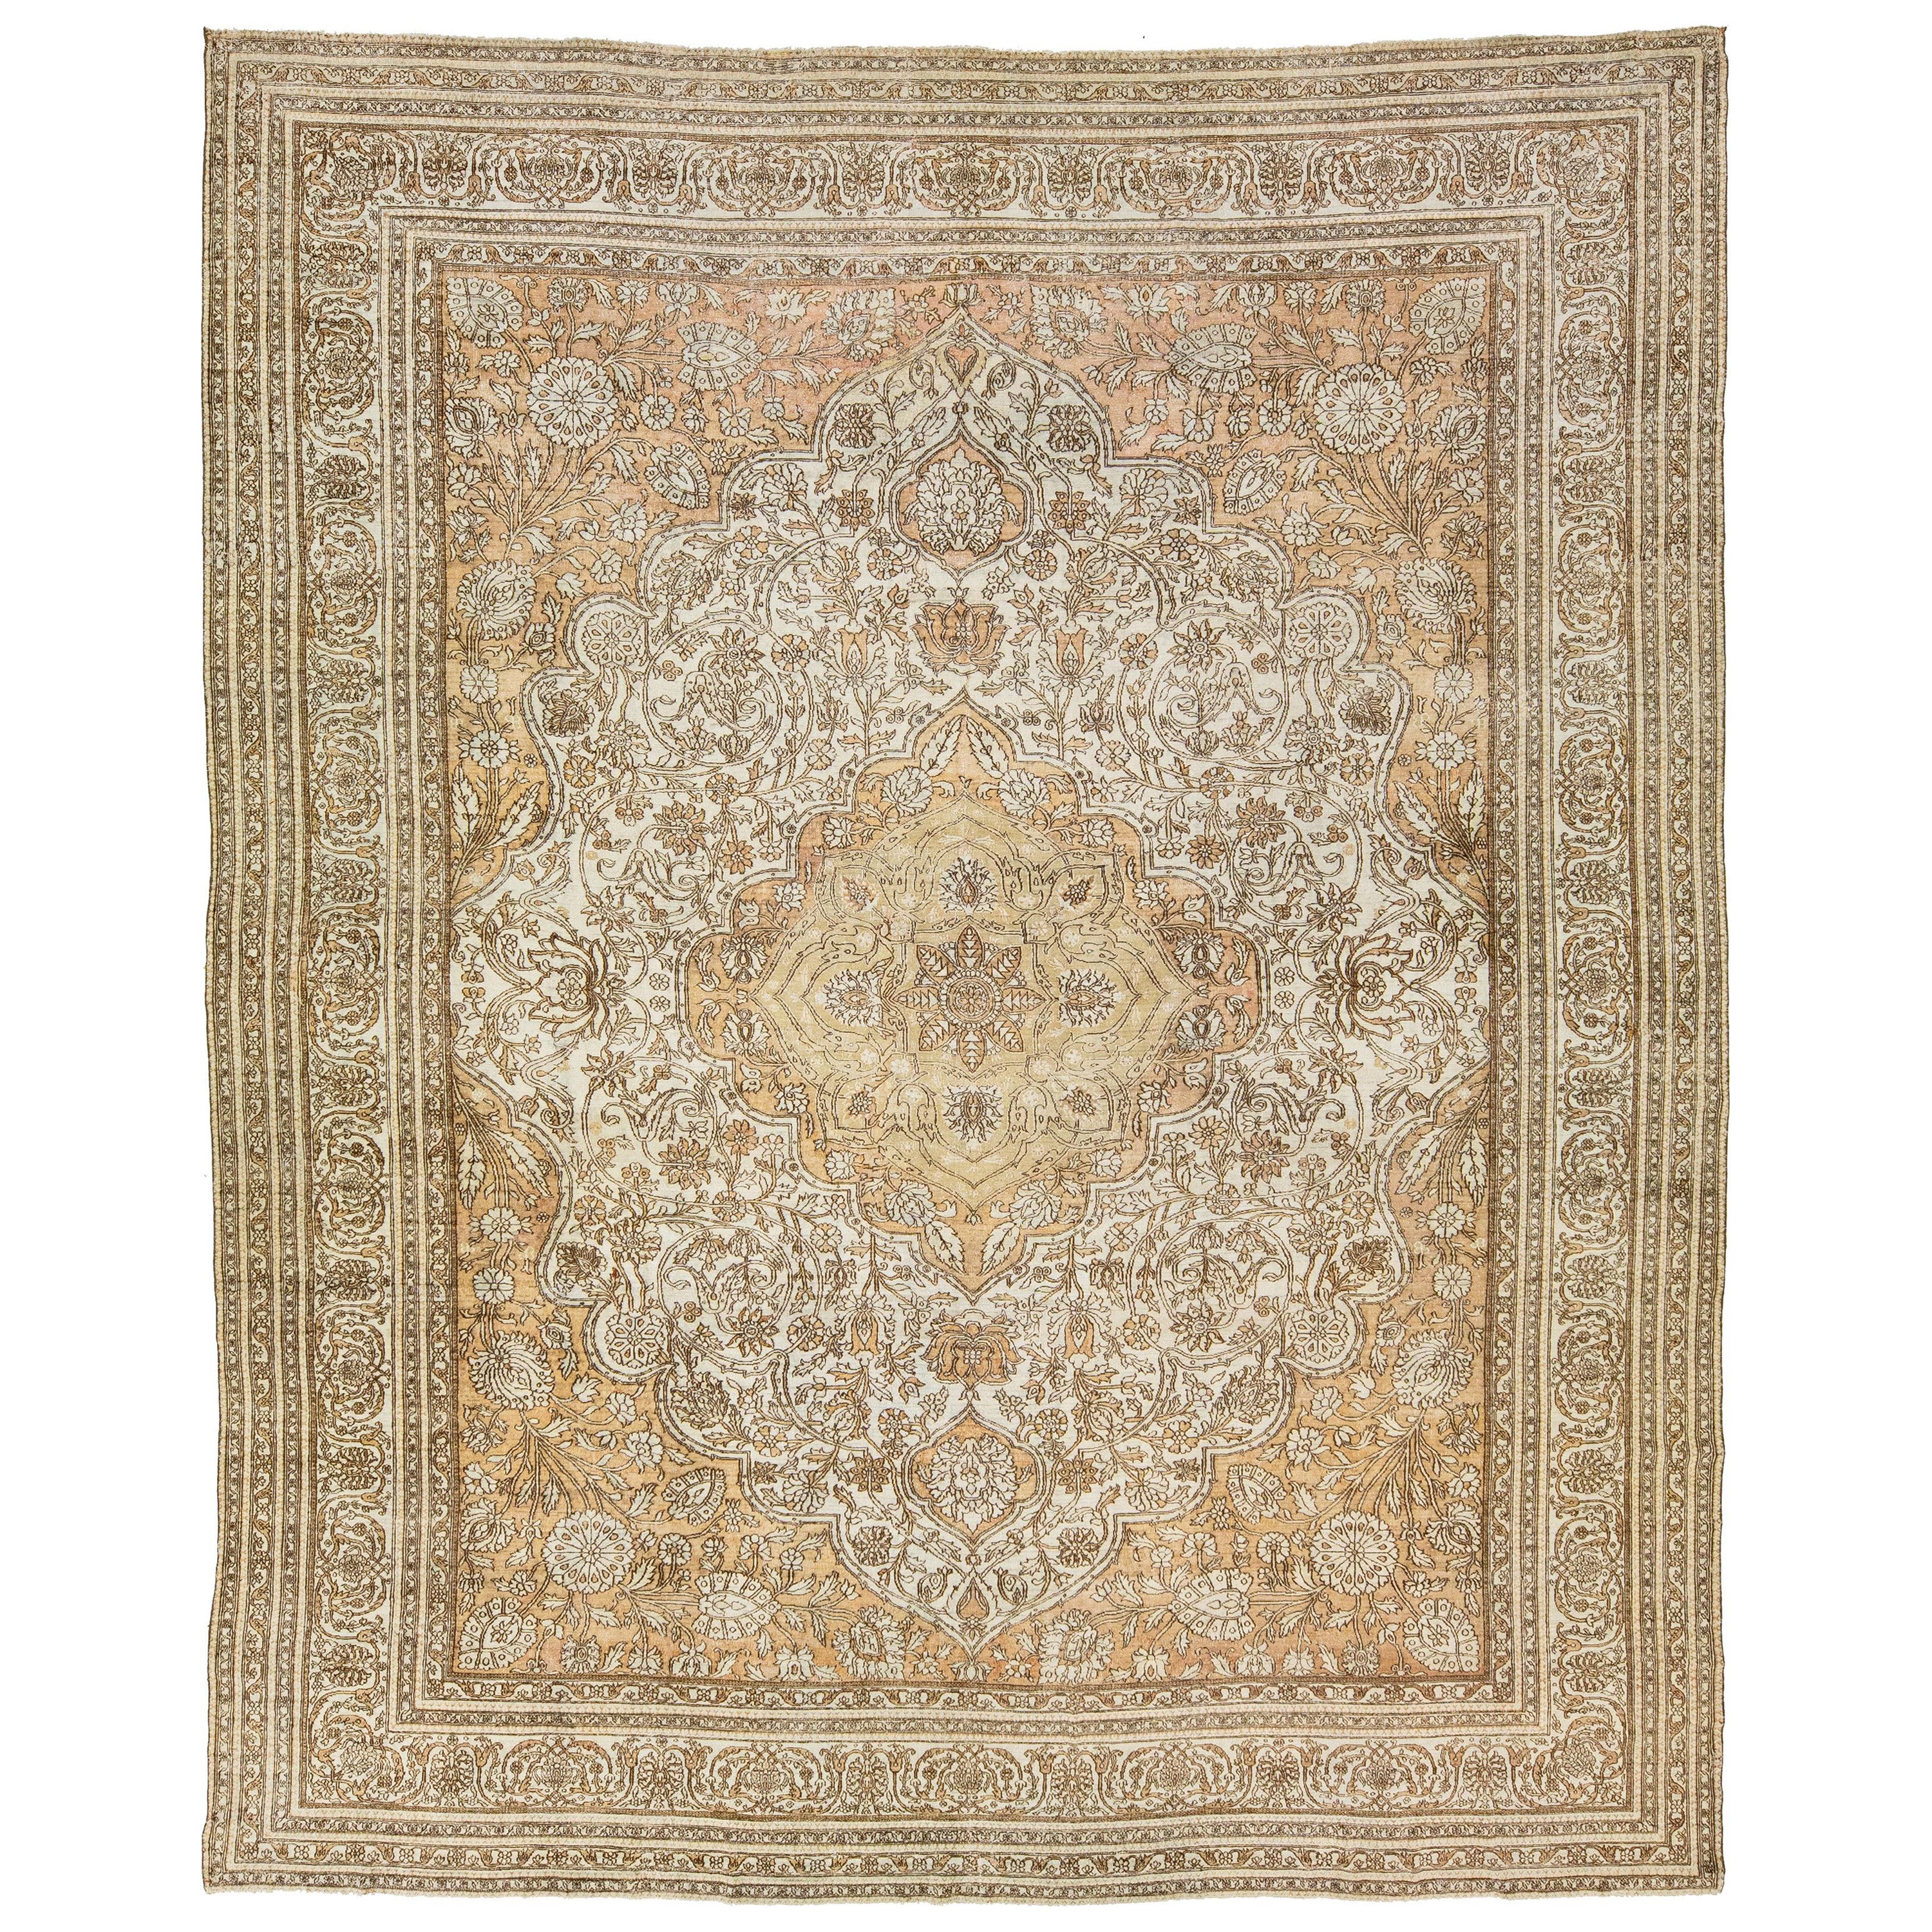 1900 Antique Indian Agra Wool Rug in Ivory and Tan with Medallion Design